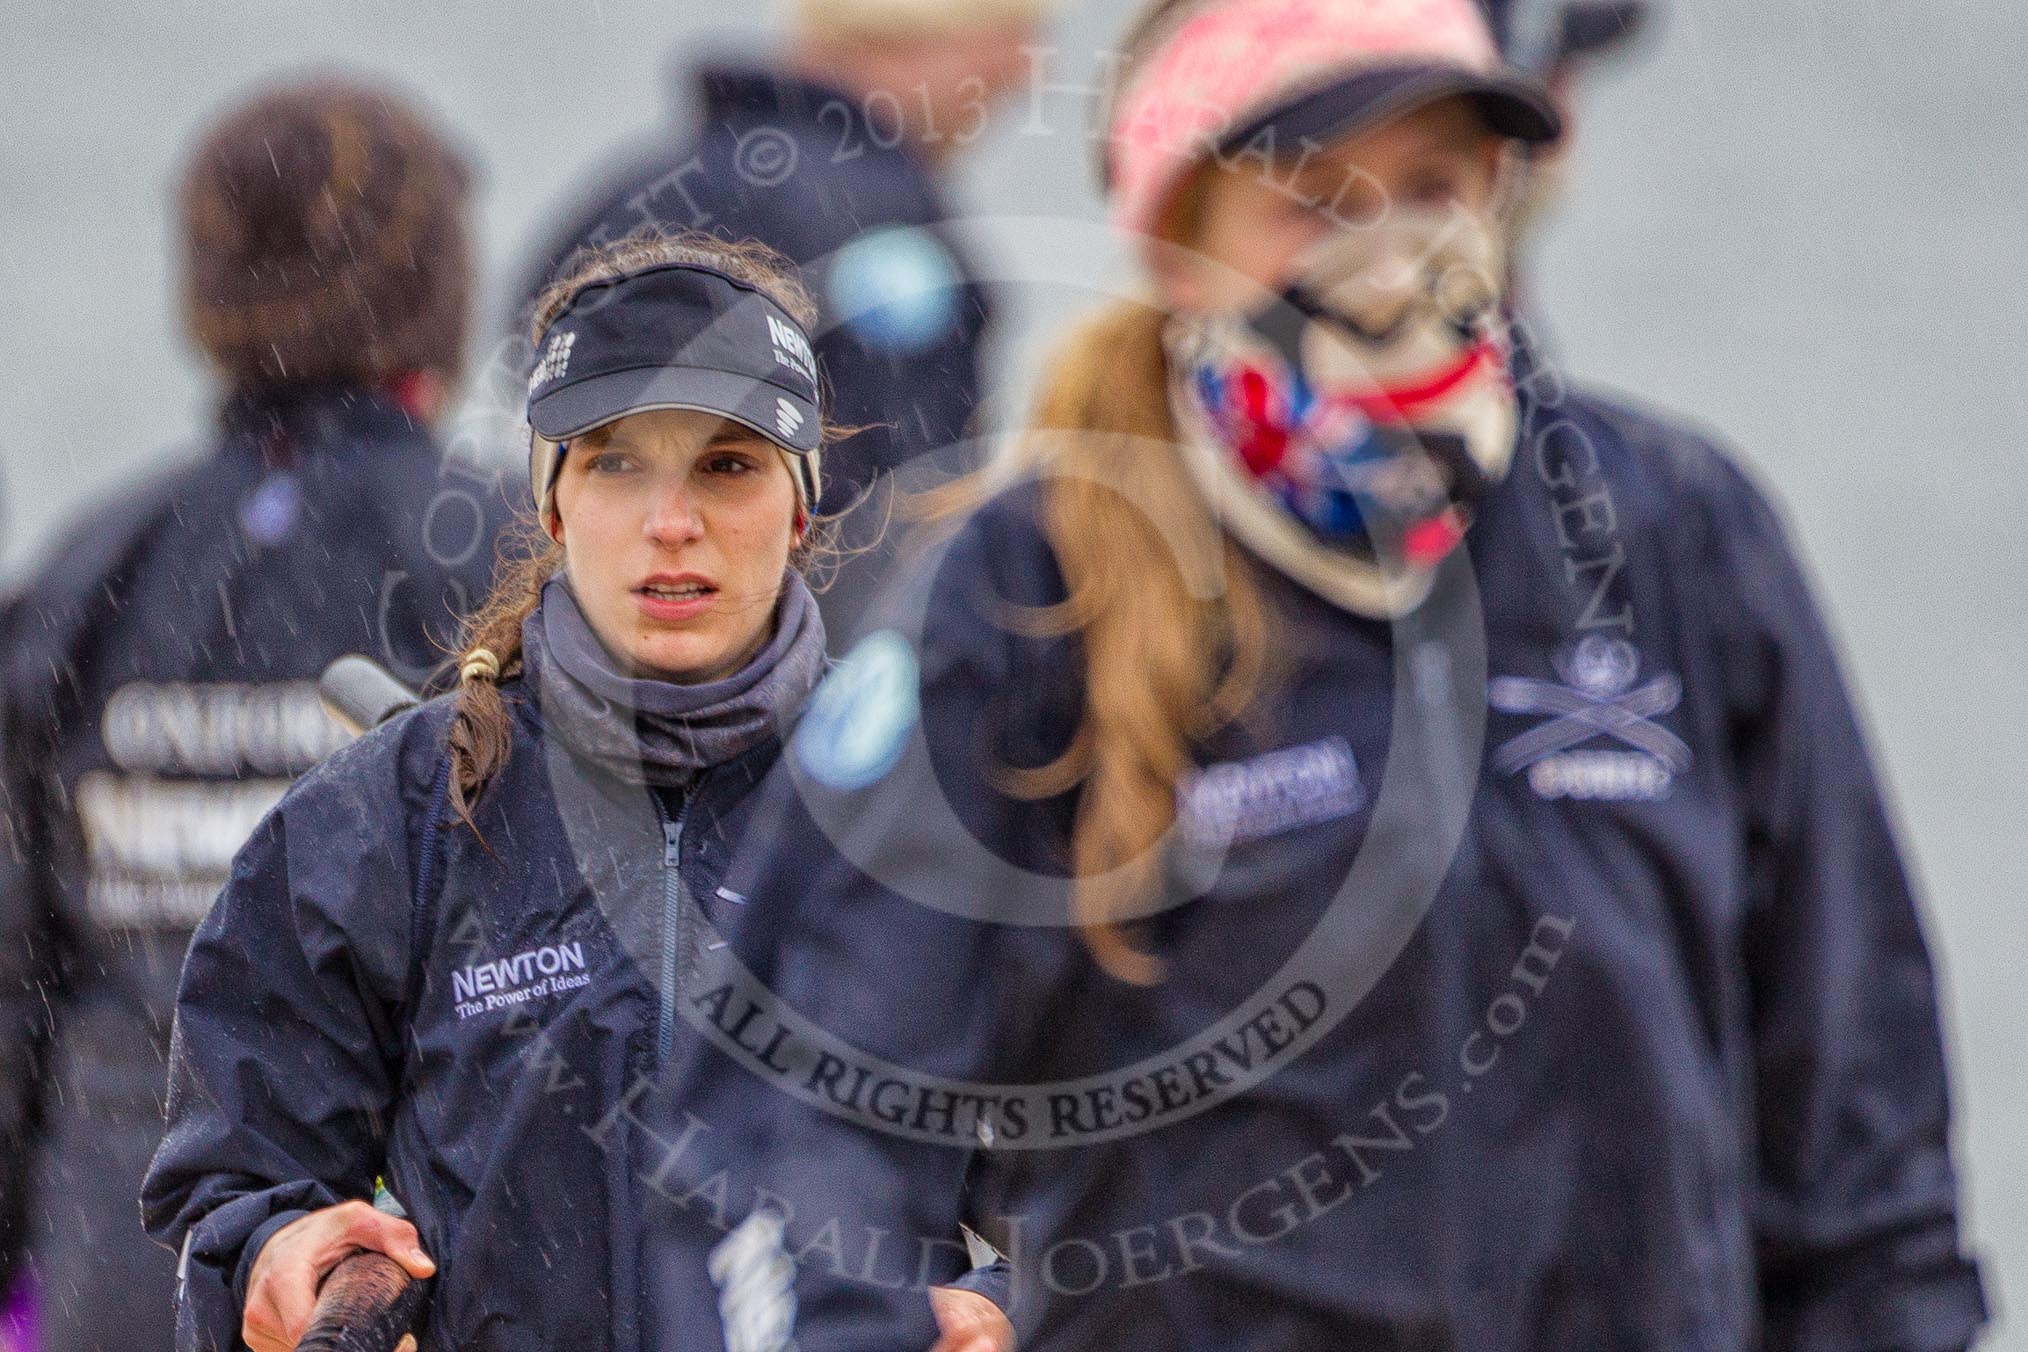 The Boat Race season 2013 - fixture OUWBC vs Olympians: Emily Chittock, stroke in the OUWBC reserve boat Osiris, and bow Coralie Viollet-Djelassi, here in focus, after a training session in pouring rain and freezing cold at Dorney Lake..
Dorney Lake,
Dorney, Windsor,
Buckinghamshire,
United Kingdom,
on 16 March 2013 at 09:58, image #3